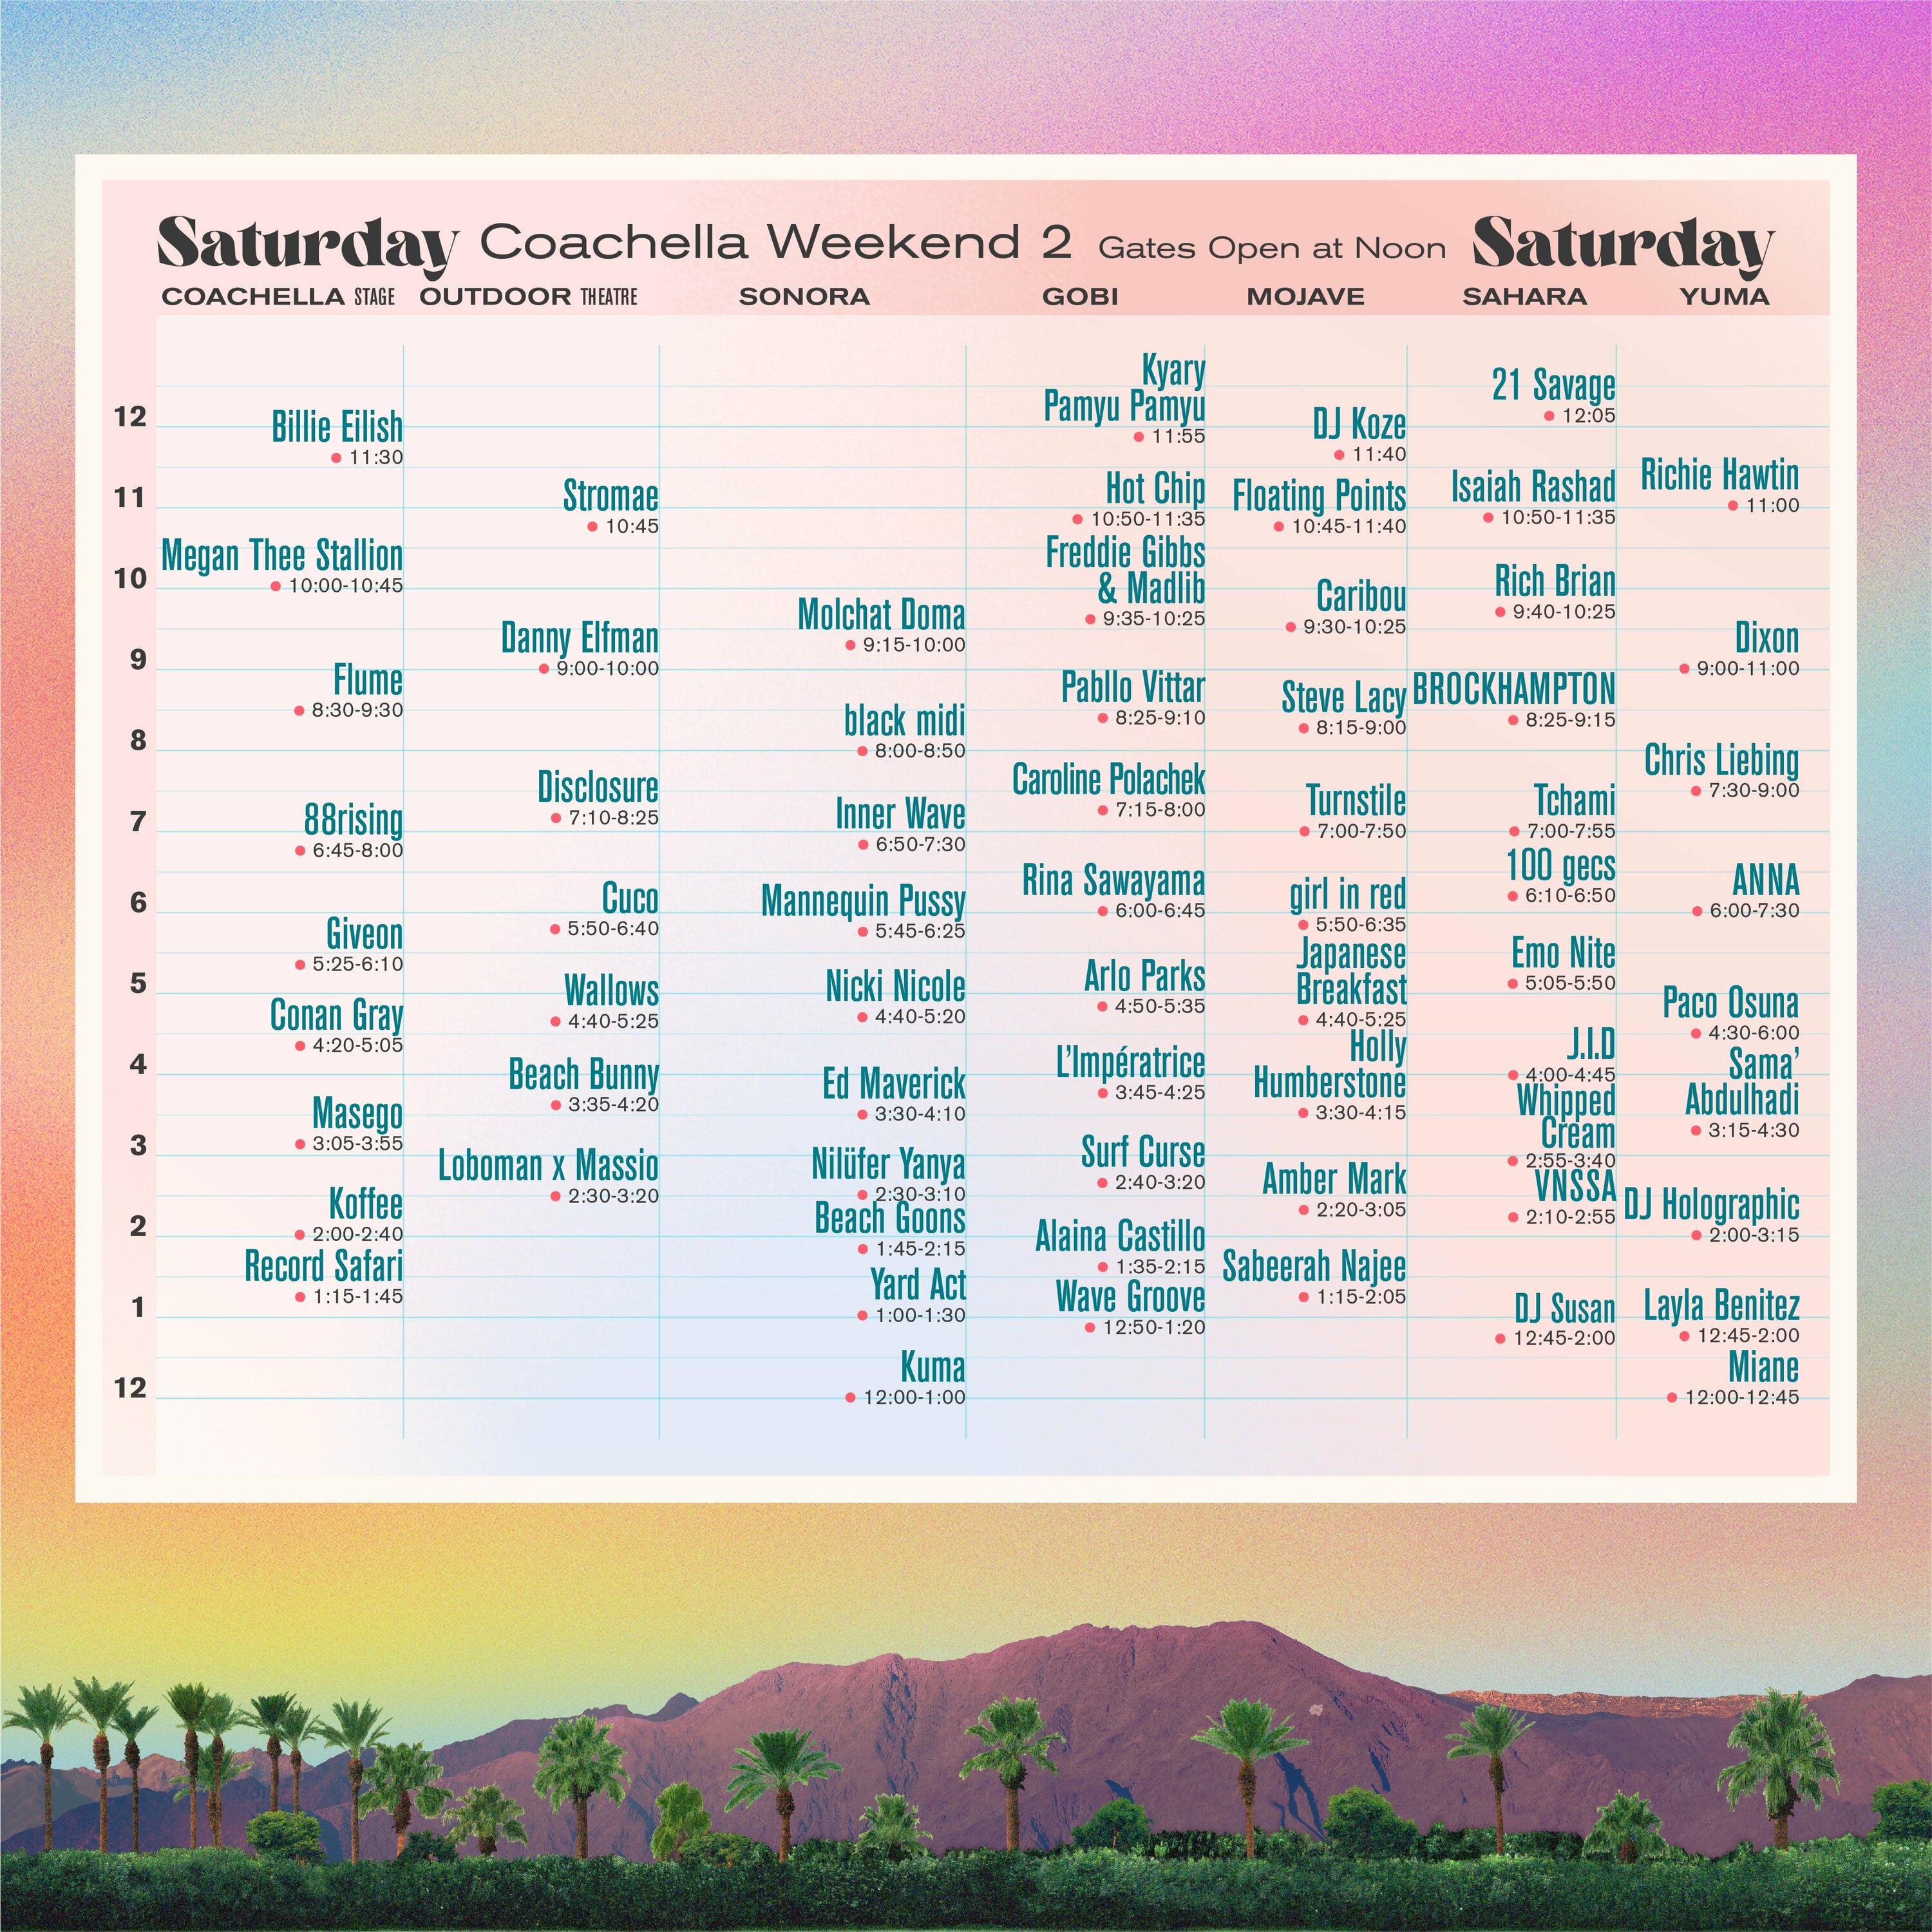 Coachella 2022 Lineup and Schedule Info is Here for Weekend Two